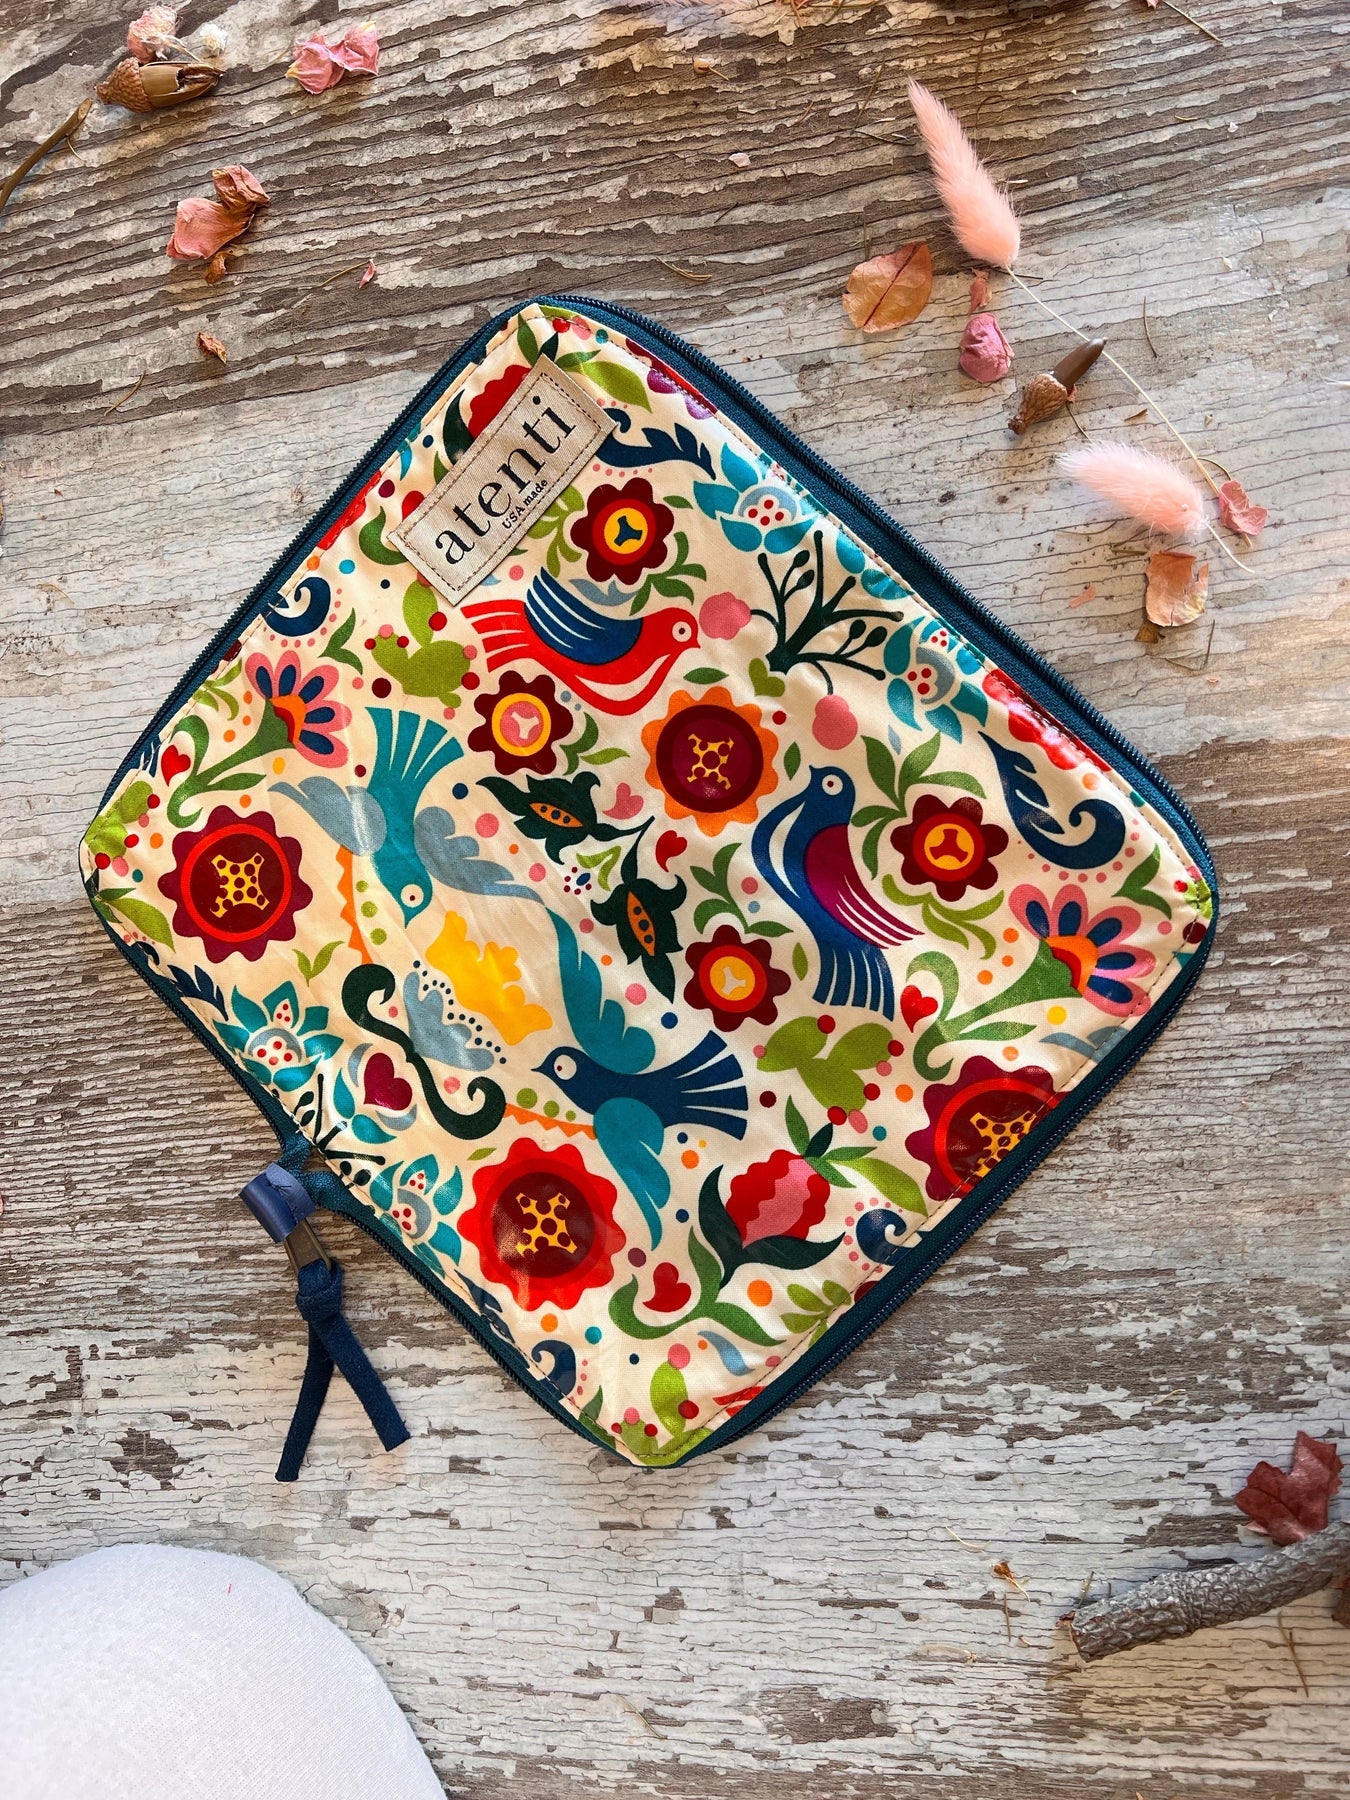 An Atenti bag in folk style fabric featuring birds and flowers